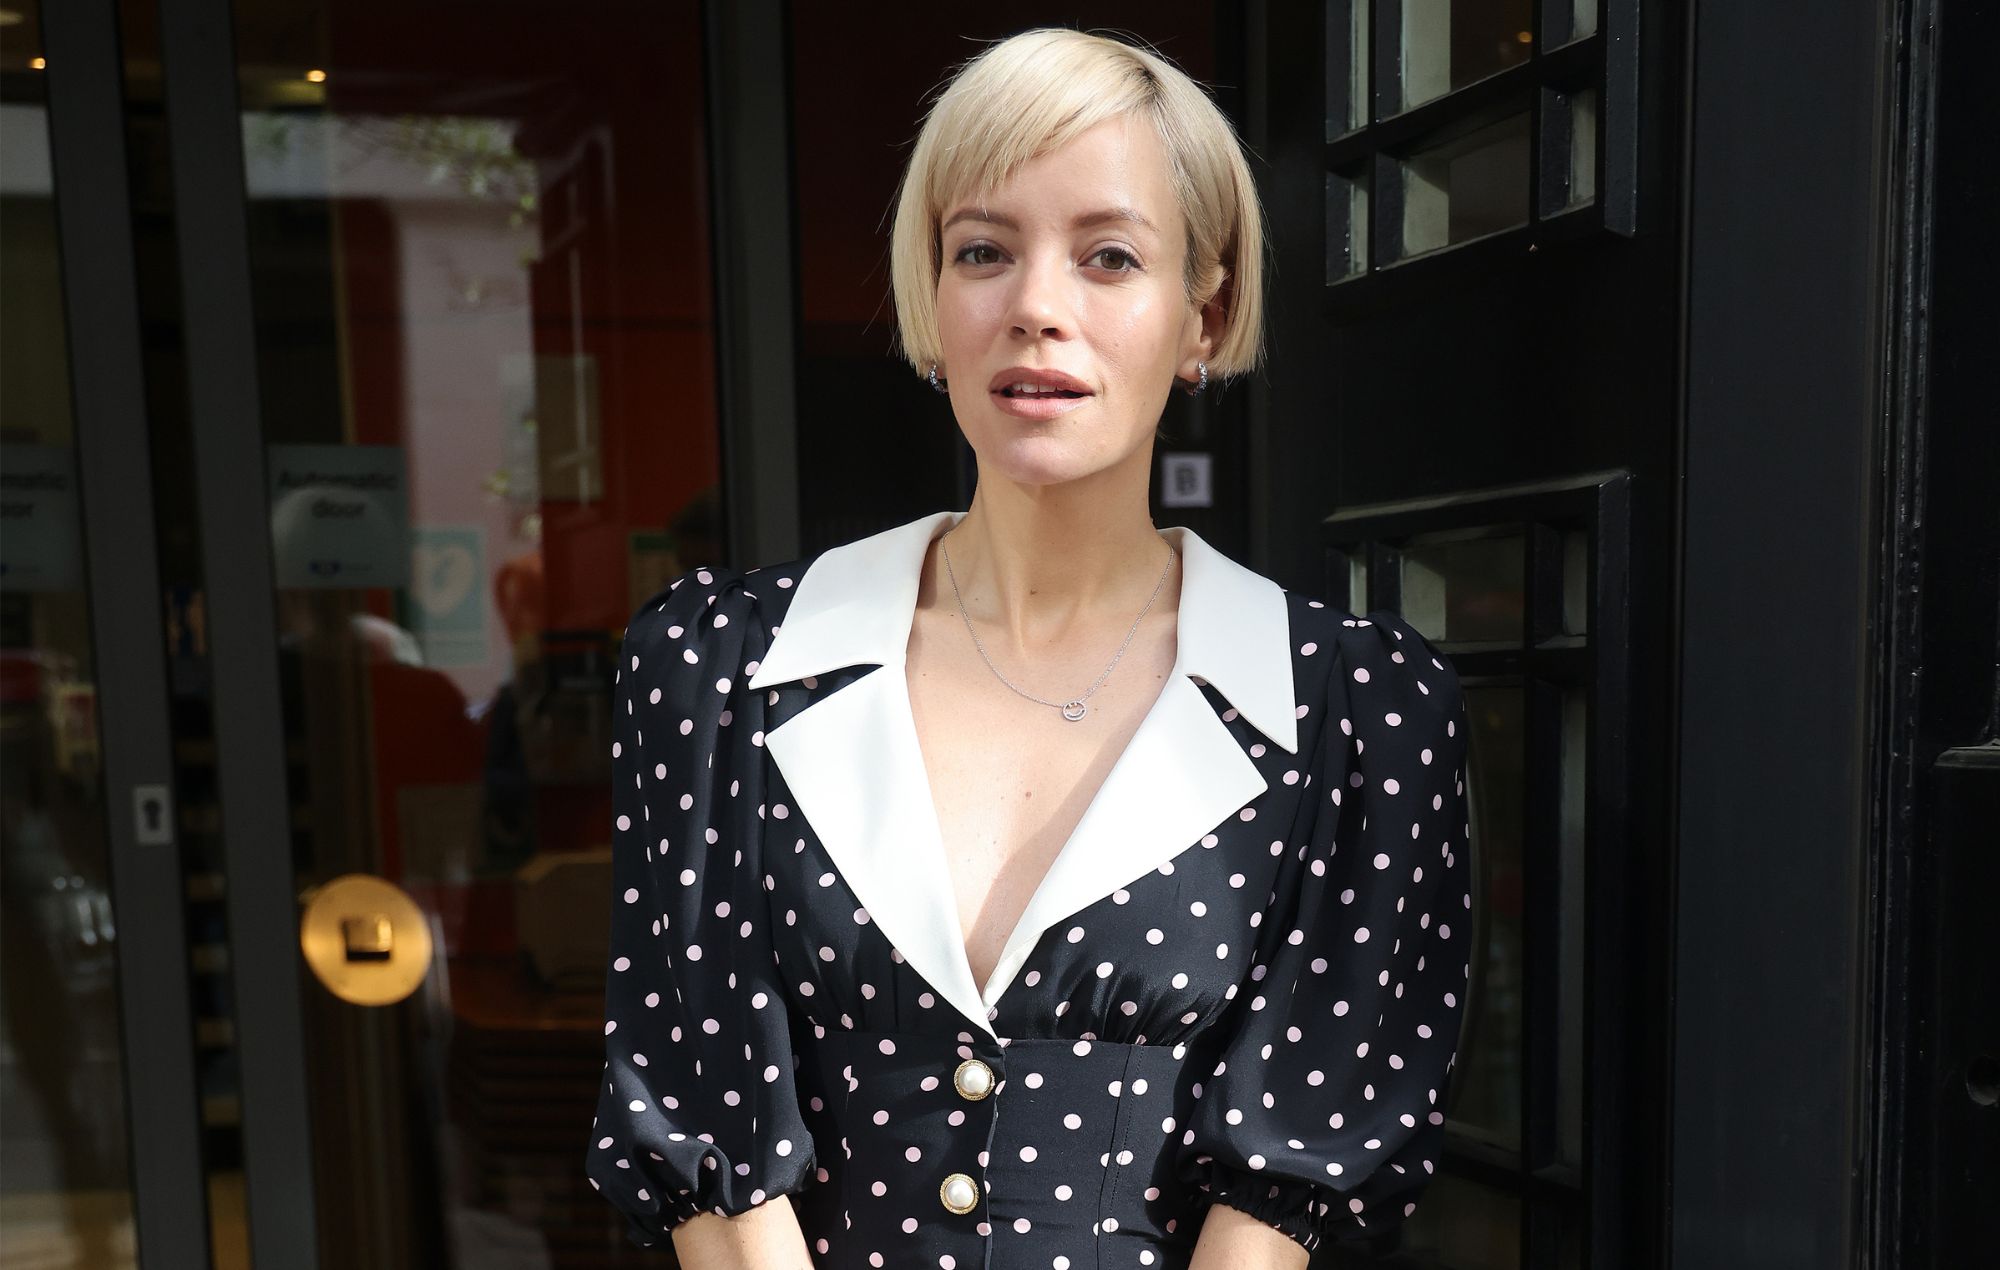 Lily Allen says her “life has changed so much” after four years of sobriety